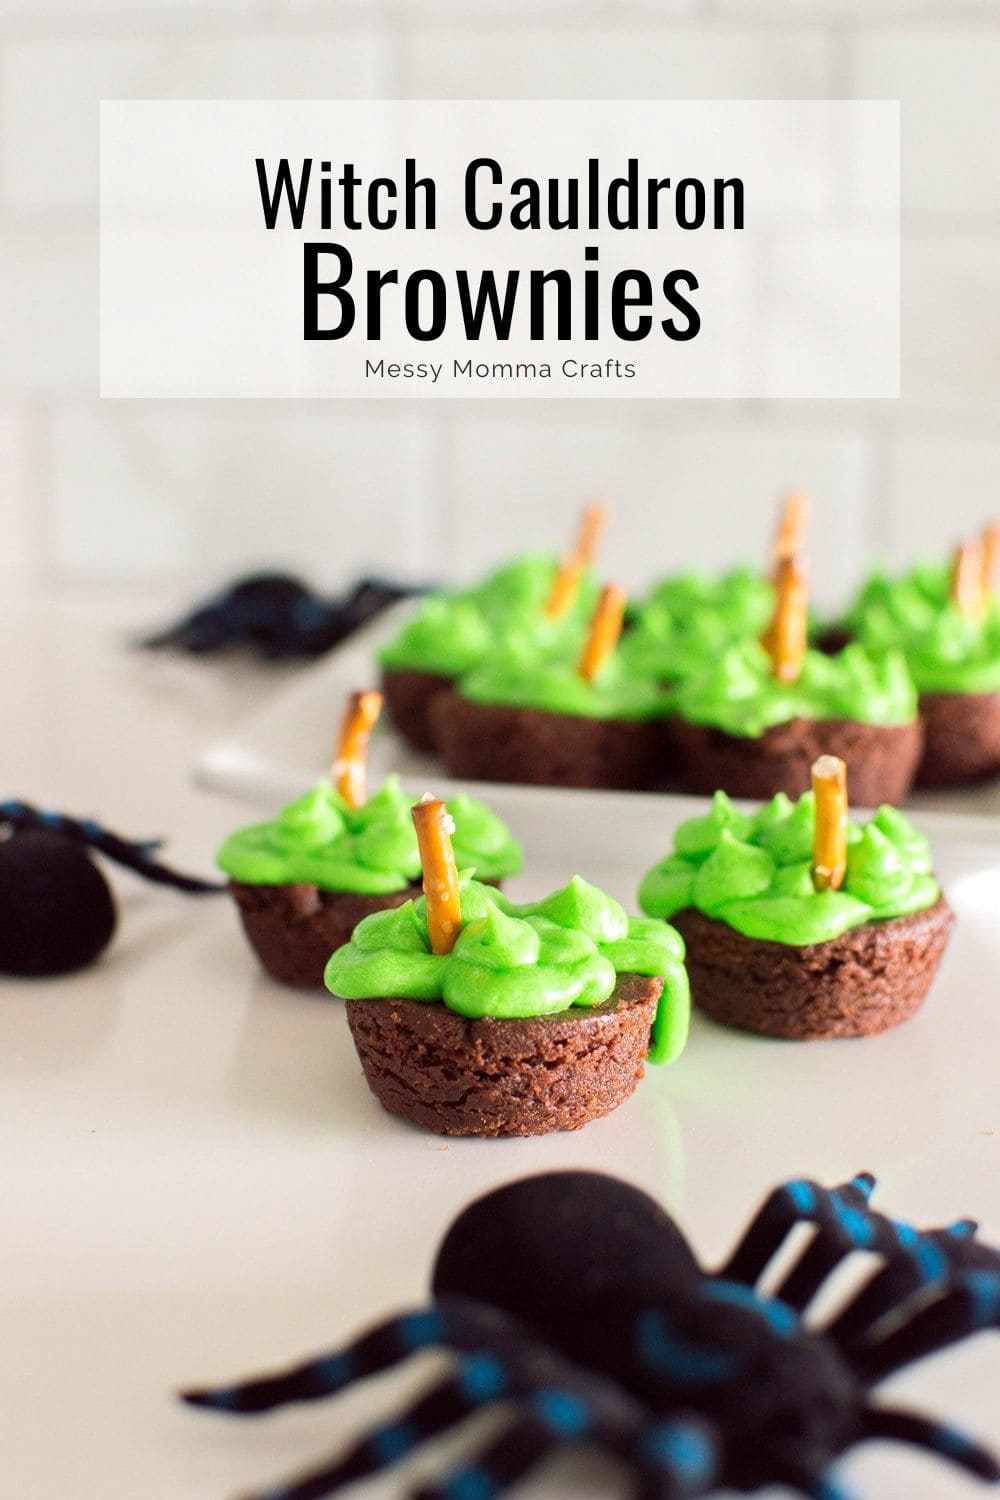 Witch cauldron brownies with green frosting and a pretzel stir stick.